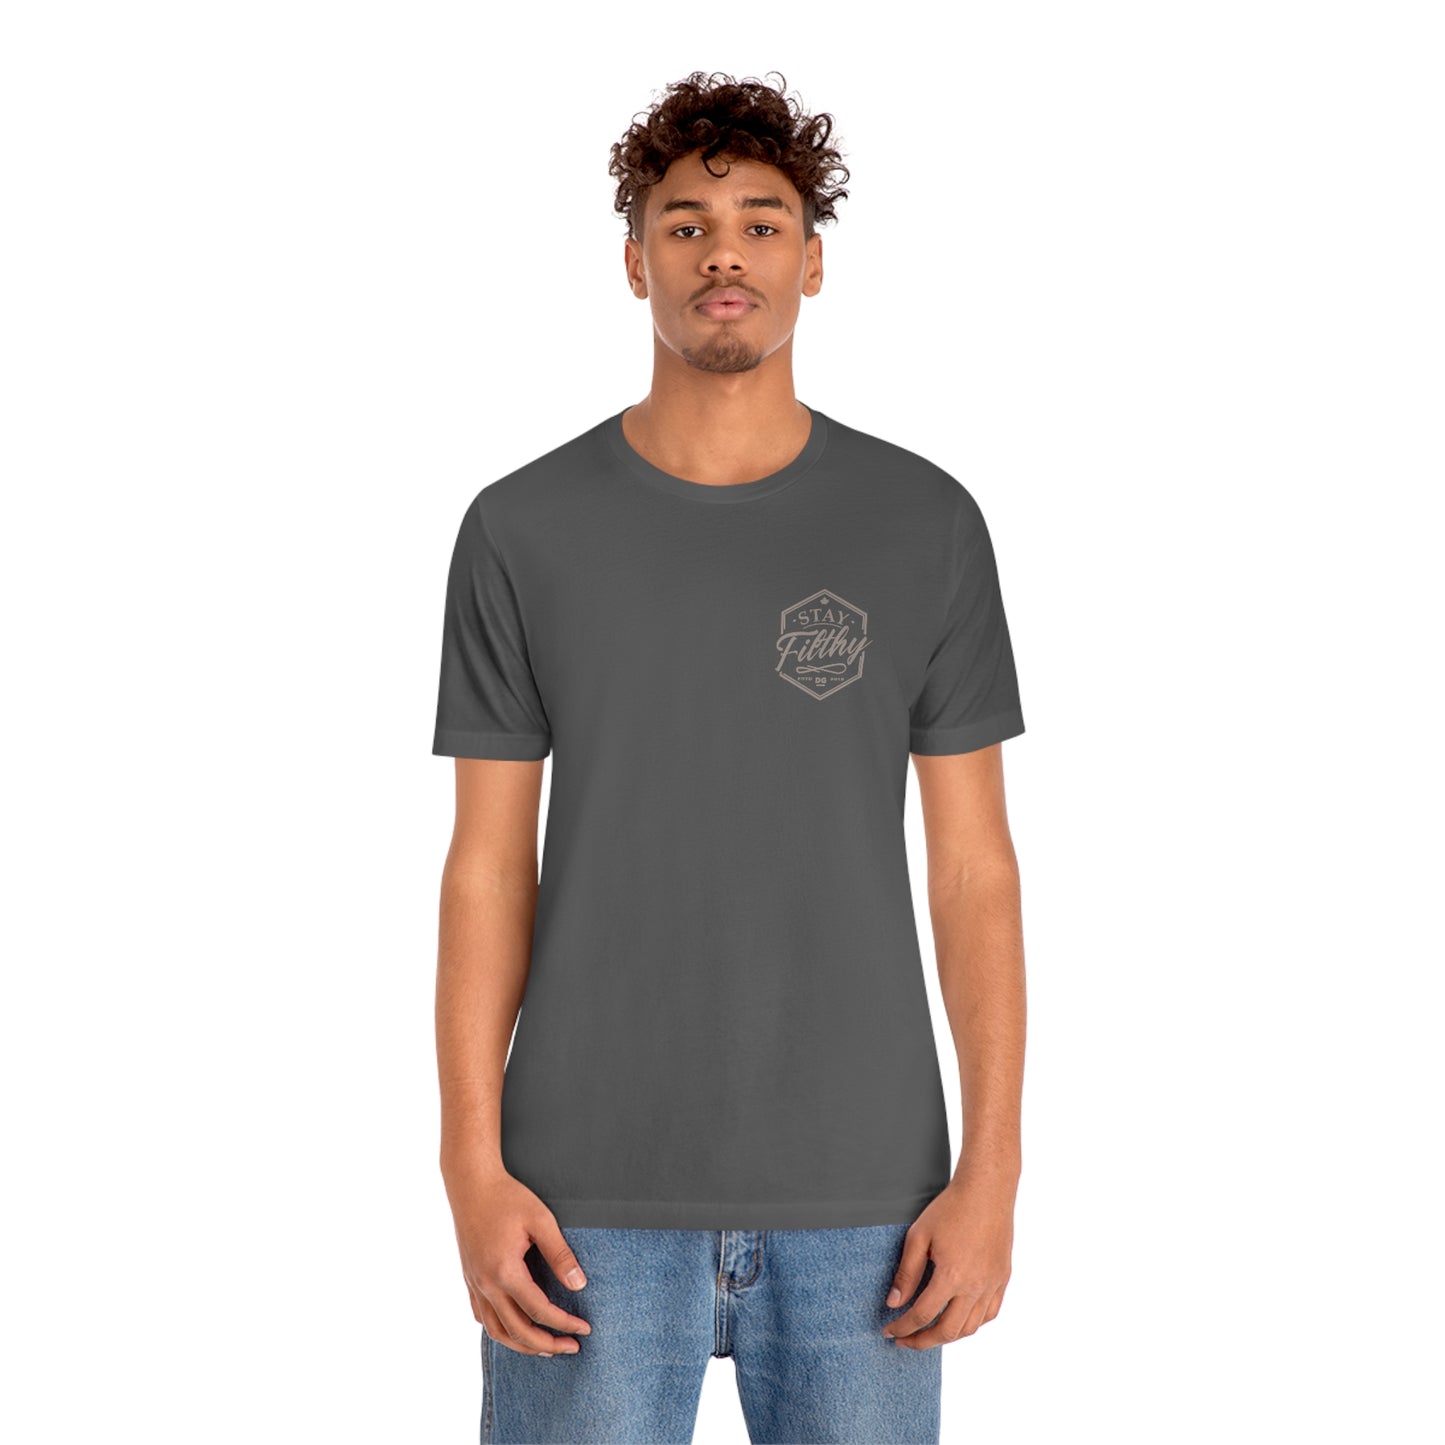 Stay Filthy T-Shirt